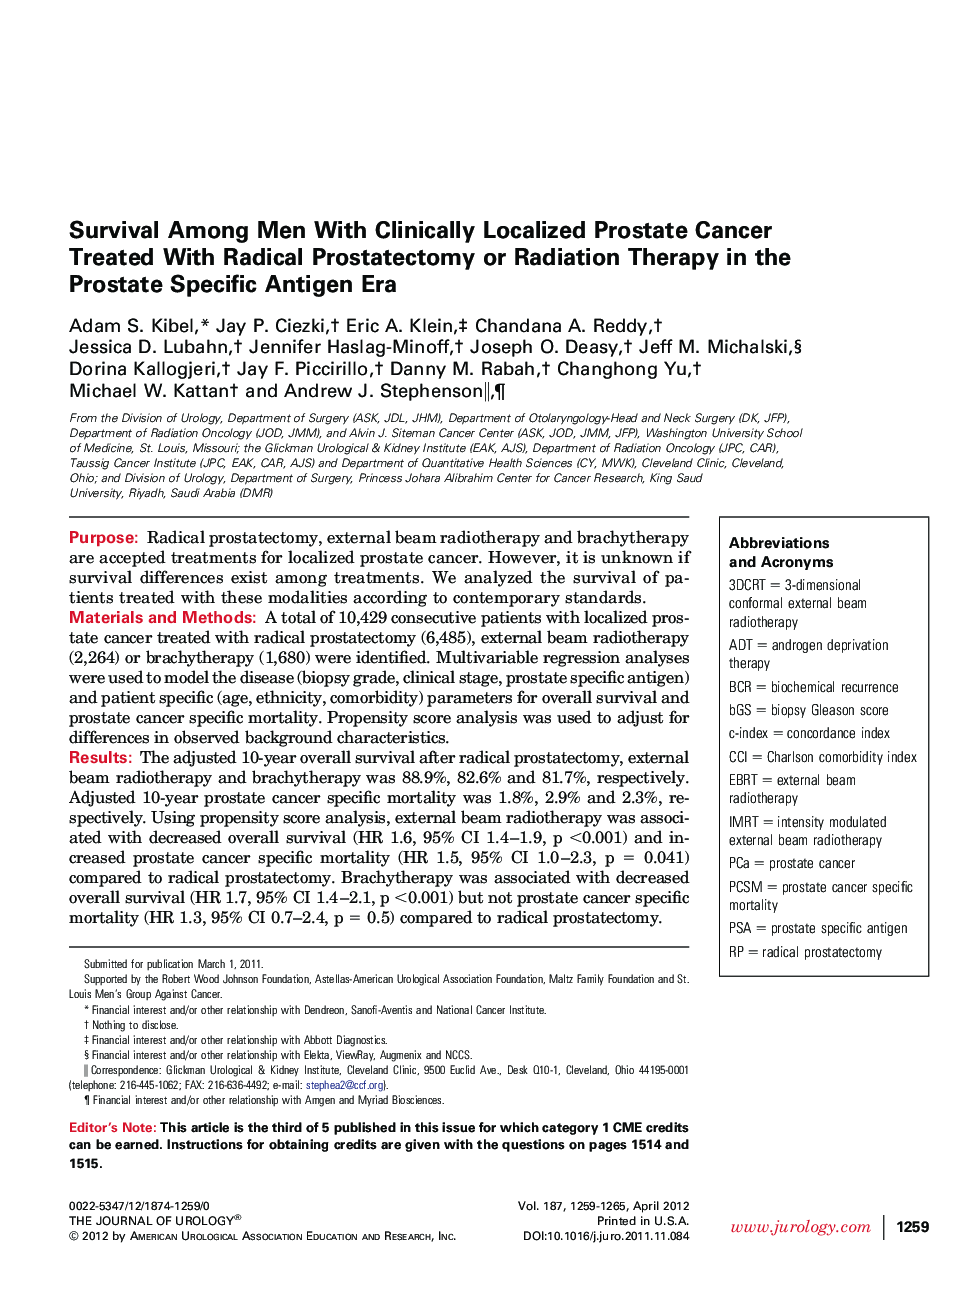 Survival Among Men With Clinically Localized Prostate Cancer Treated With Radical Prostatectomy or Radiation Therapy in the Prostate Specific Antigen Era 